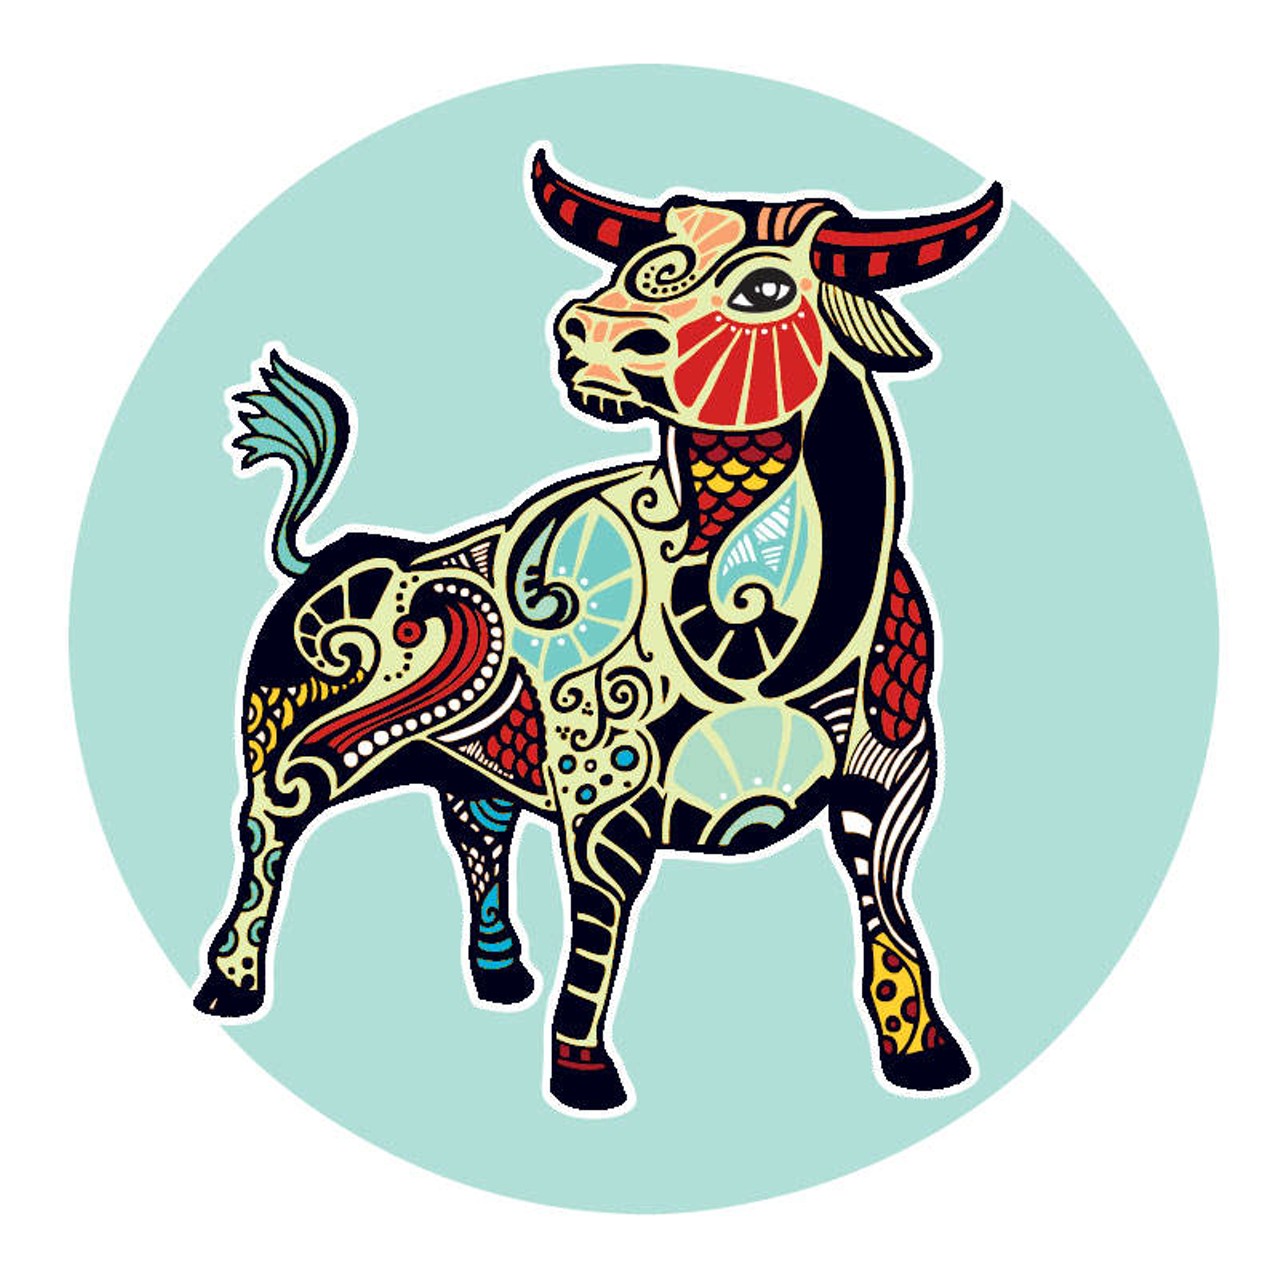 TAURUS (April 21 -May 20): 
You have waited long enough for what appears to be the chance of a lifetime. To make the most of this moment, you need to keep your feet on the ground. What looks like a dream come true is about to go through a few adjustments. There will be tests and challenges that show you exactly how much this matters to you that will be ongoing for the next few weeks. If this was a movie, you&#146;d be just about to do the part where you sink or swim. This isn&#146;t anything you haven&#146;t seen before. And as tense as things seem, what&#146;s opening up right now will pave everything from here on.